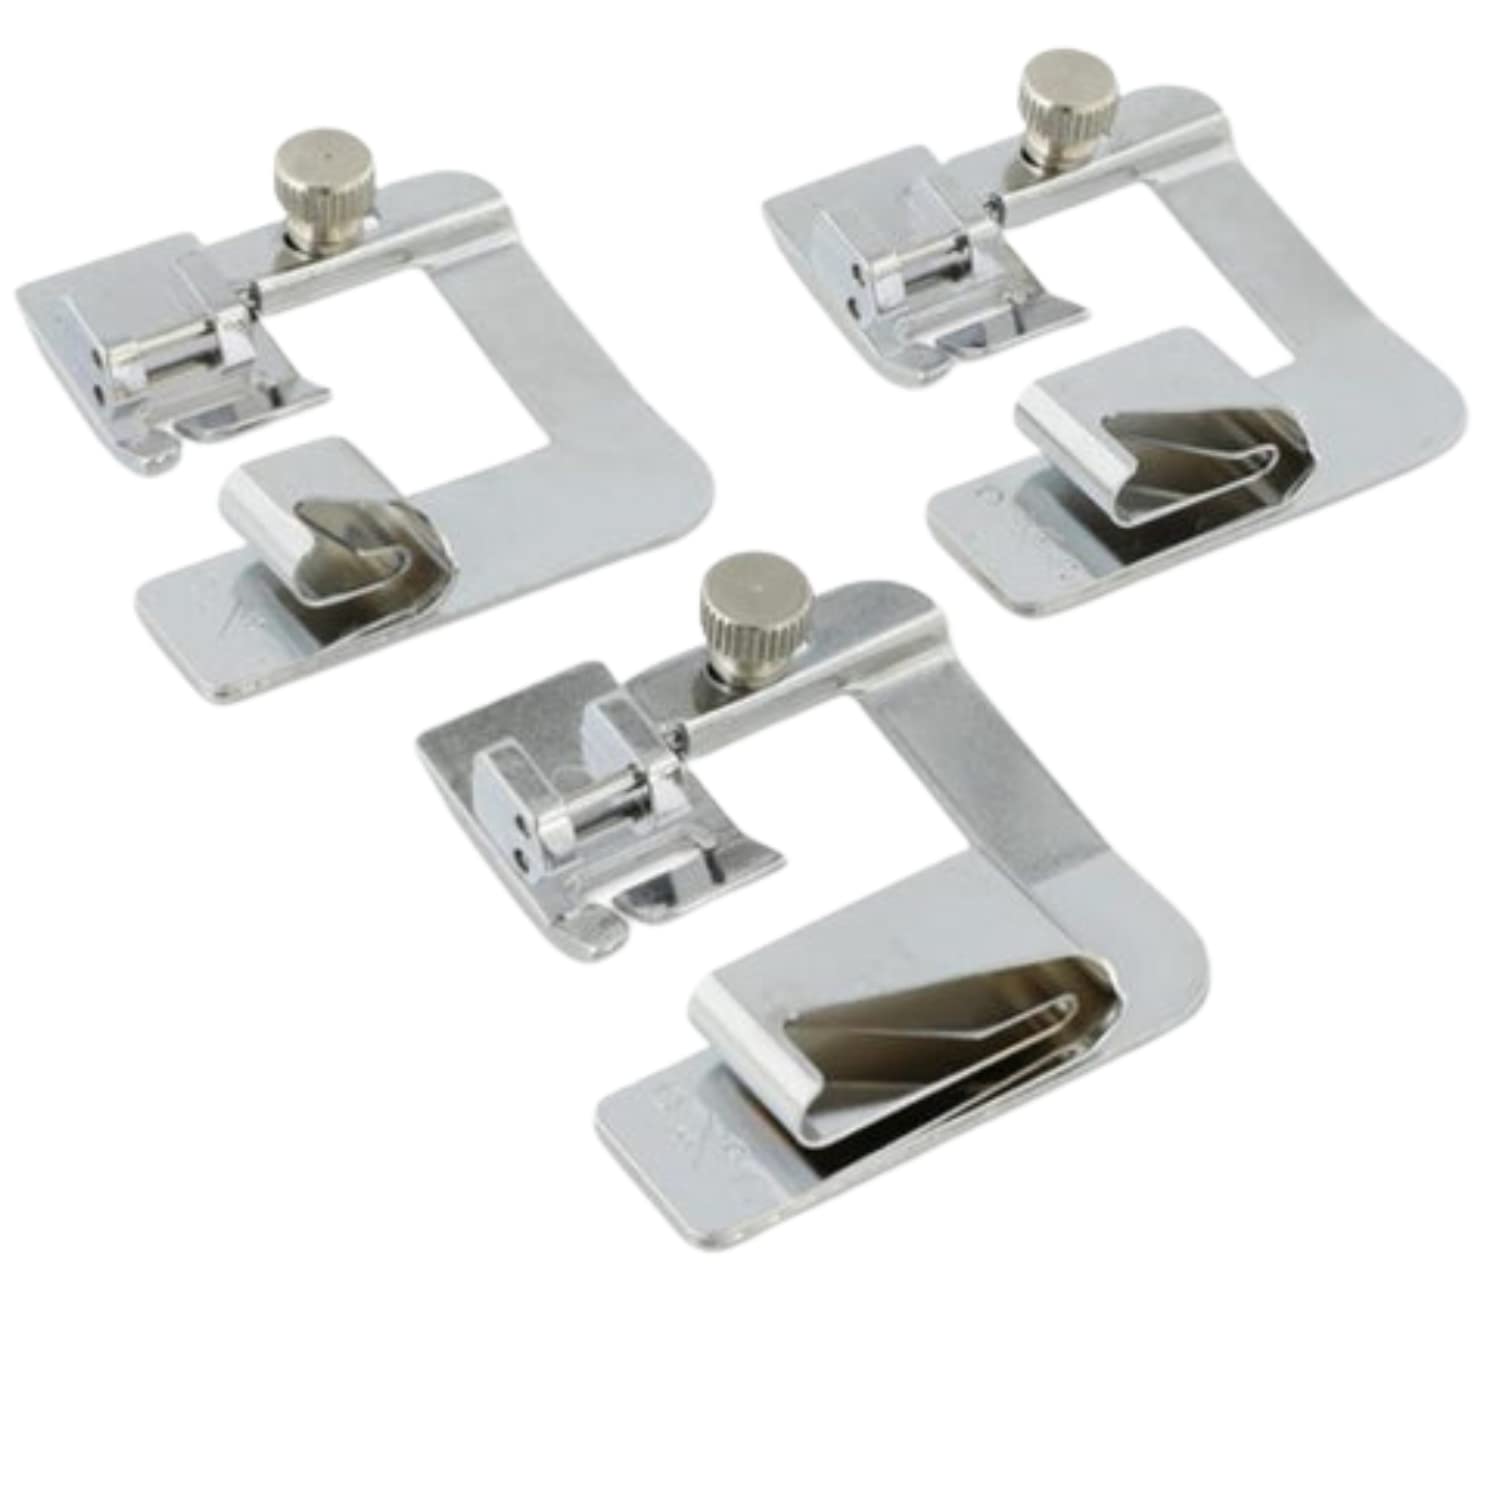 Madam Sew Rolled Hem Presser Foot Set 3 Piece Wide Hemmer Foot Kit Includes  1/2, 3/4 and 1 Presser Feet Compatible with Singer, Brother, Babylock,  Euro-Pro, Janome and More